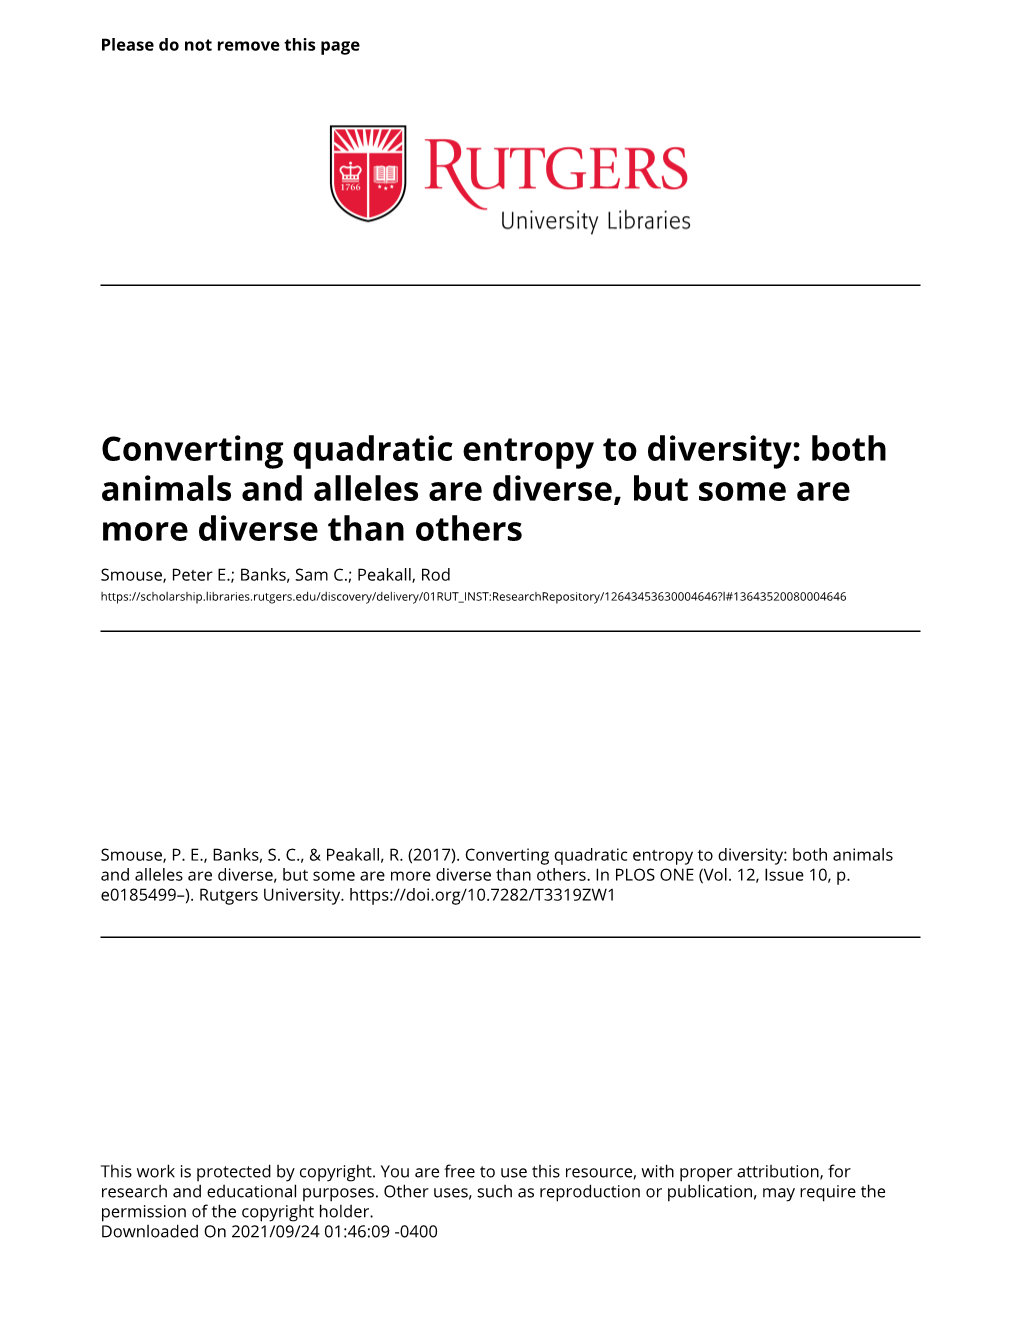 Converting Quadratic Entropy to Diversity: Both Animals and Alleles Are Diverse, but Some Are More Diverse Than Others